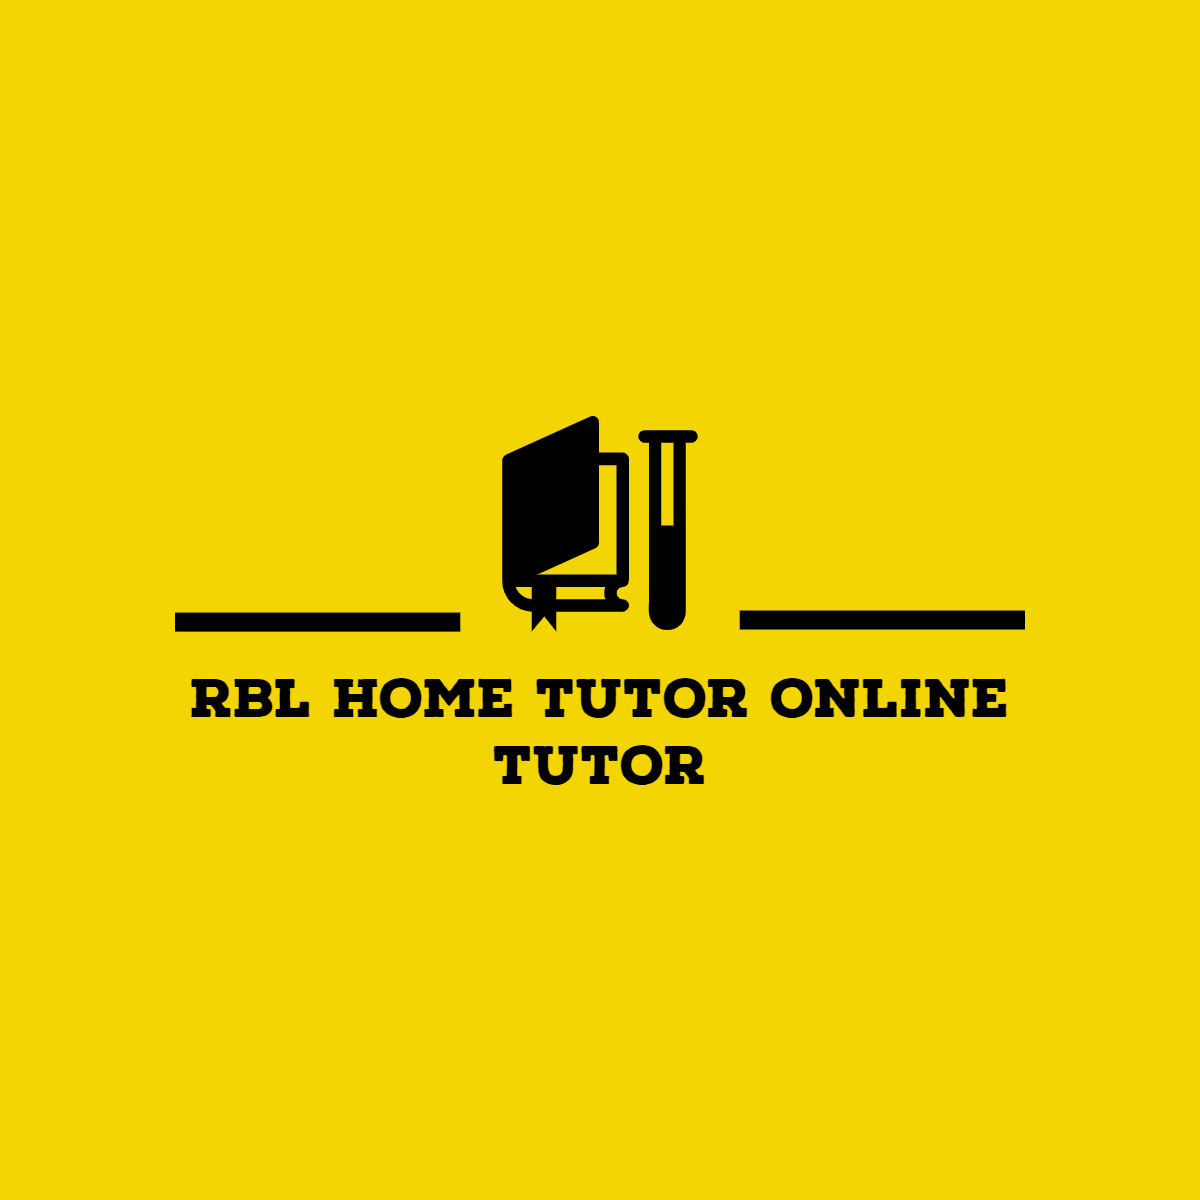 financial management home tuition, financial management home tutor, financial management home tuition, BBA tuition, MBA tuition, BBA home tutor, MBA home tutor, B.com home tutor, B.com home tuition